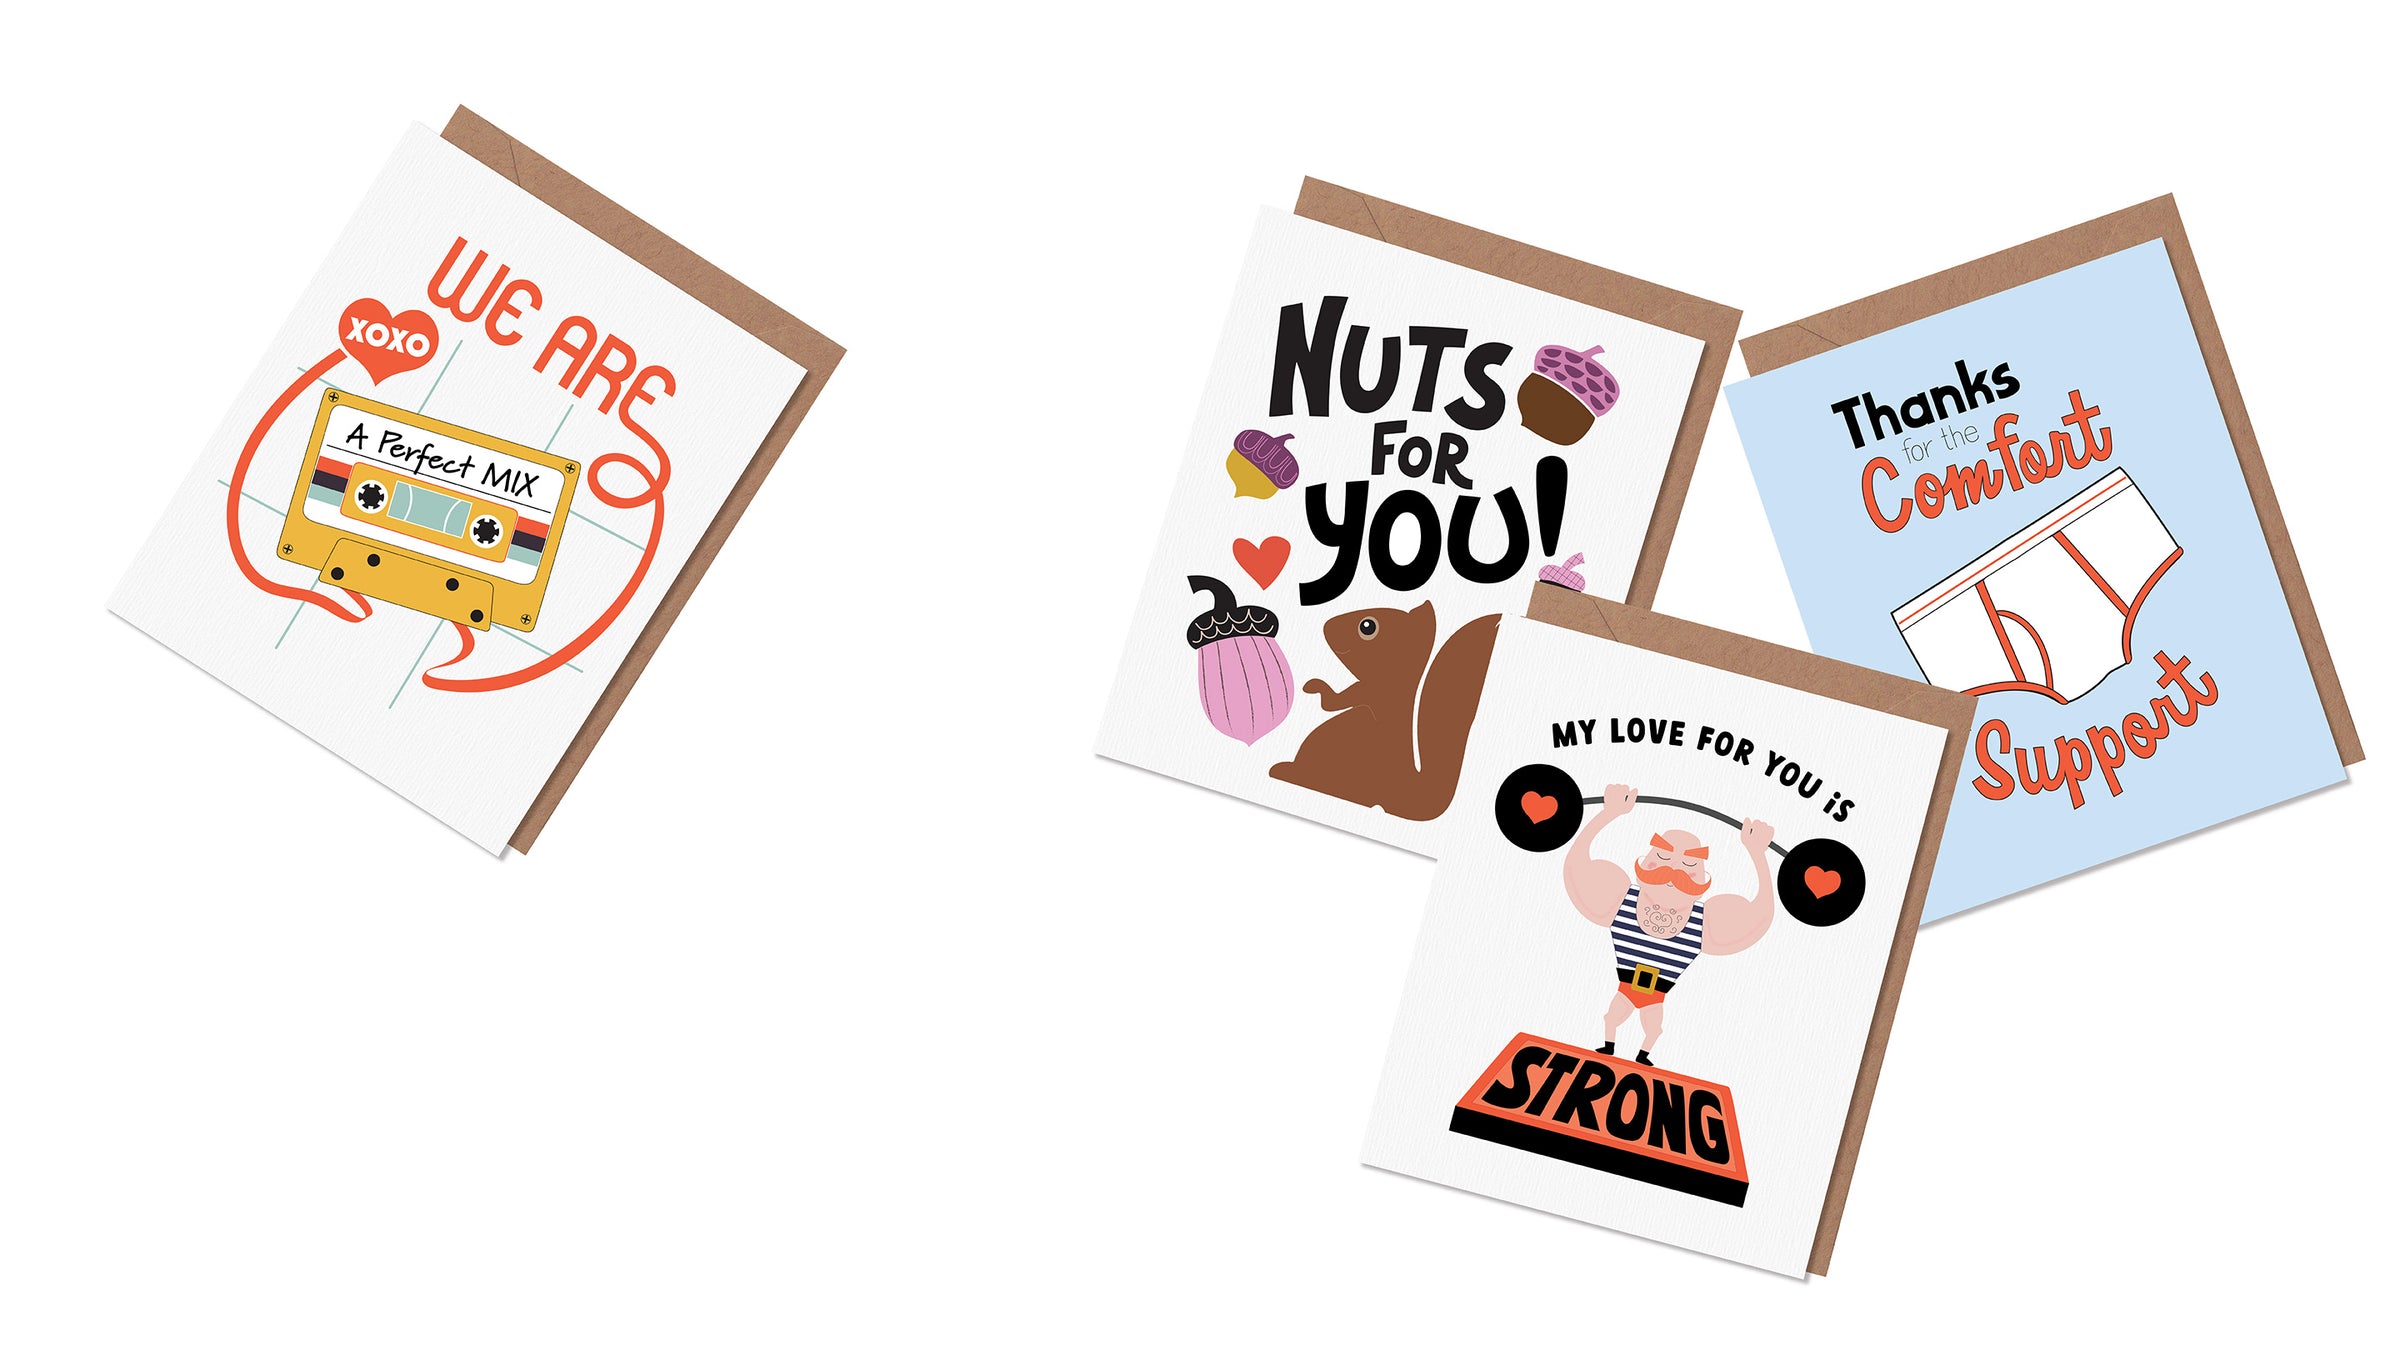 Illustrated greeting card designs by Gigglemugg